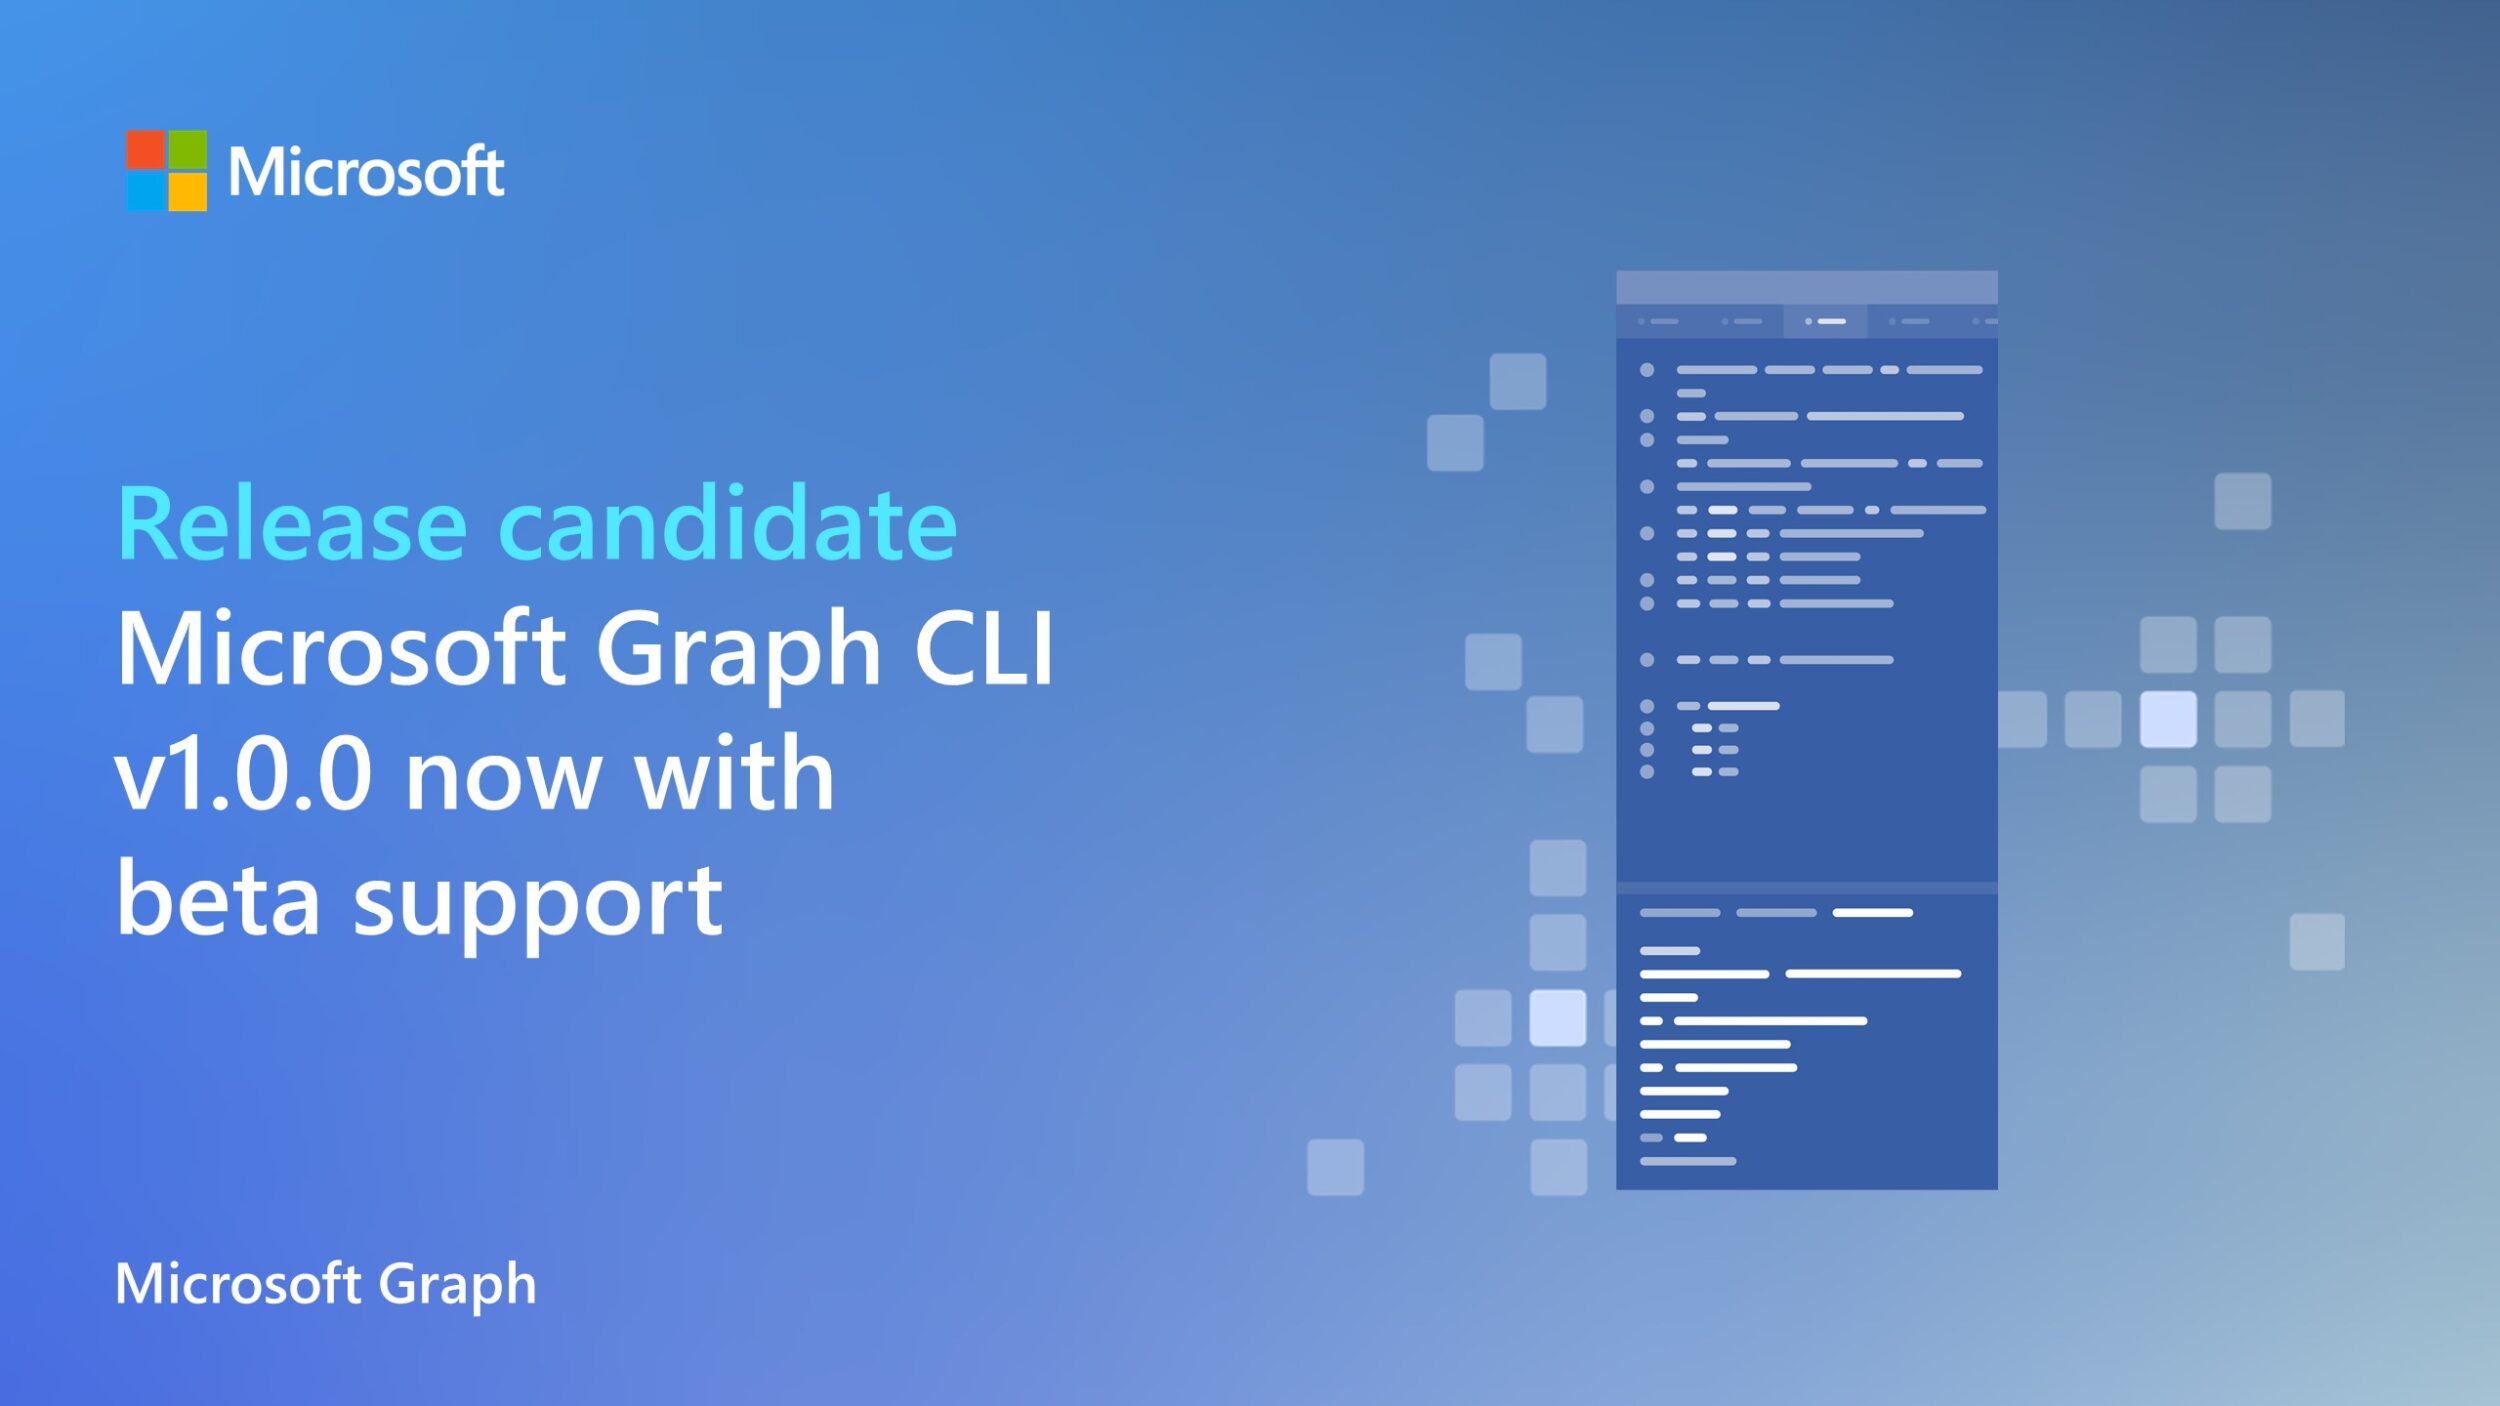 Announcing Microsoft Graph CLI v1.0.0 release candidate, now with beta support